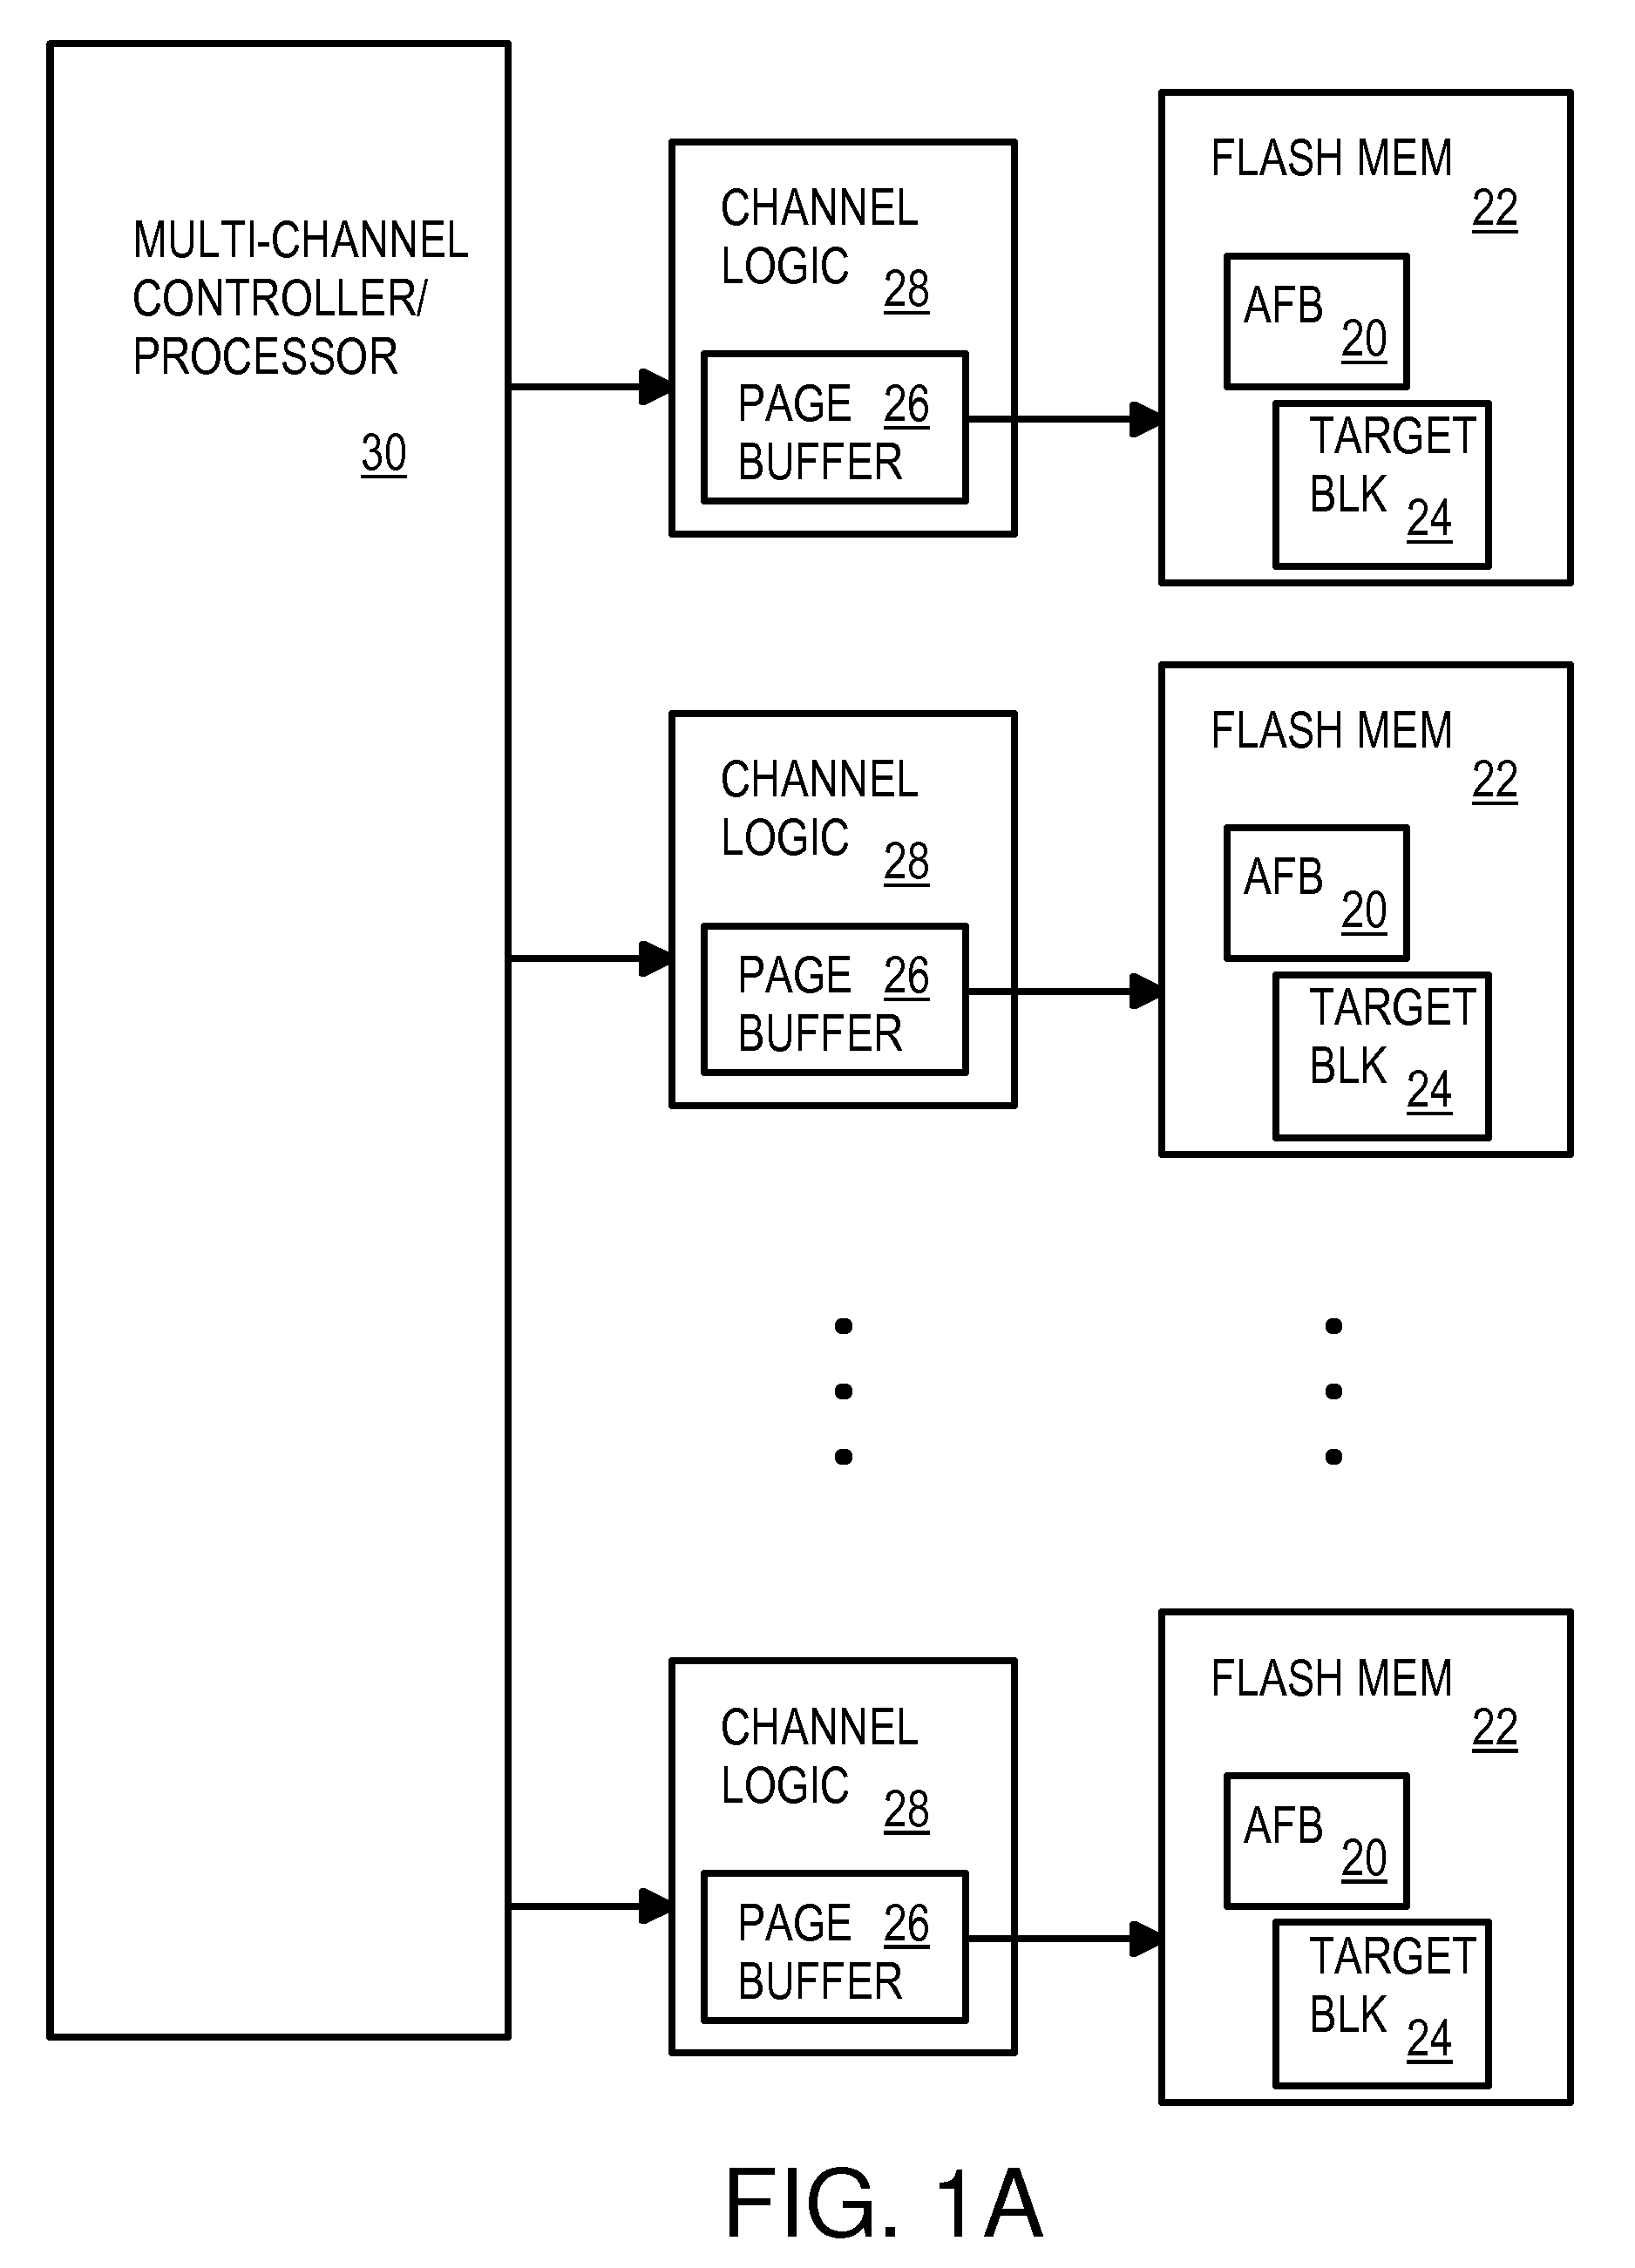 Multi-Operation Write Aggregator Using a Page Buffer and a Scratch Flash Block in Each of Multiple Channels of a Large Array of Flash Memory to Reduce Block Wear